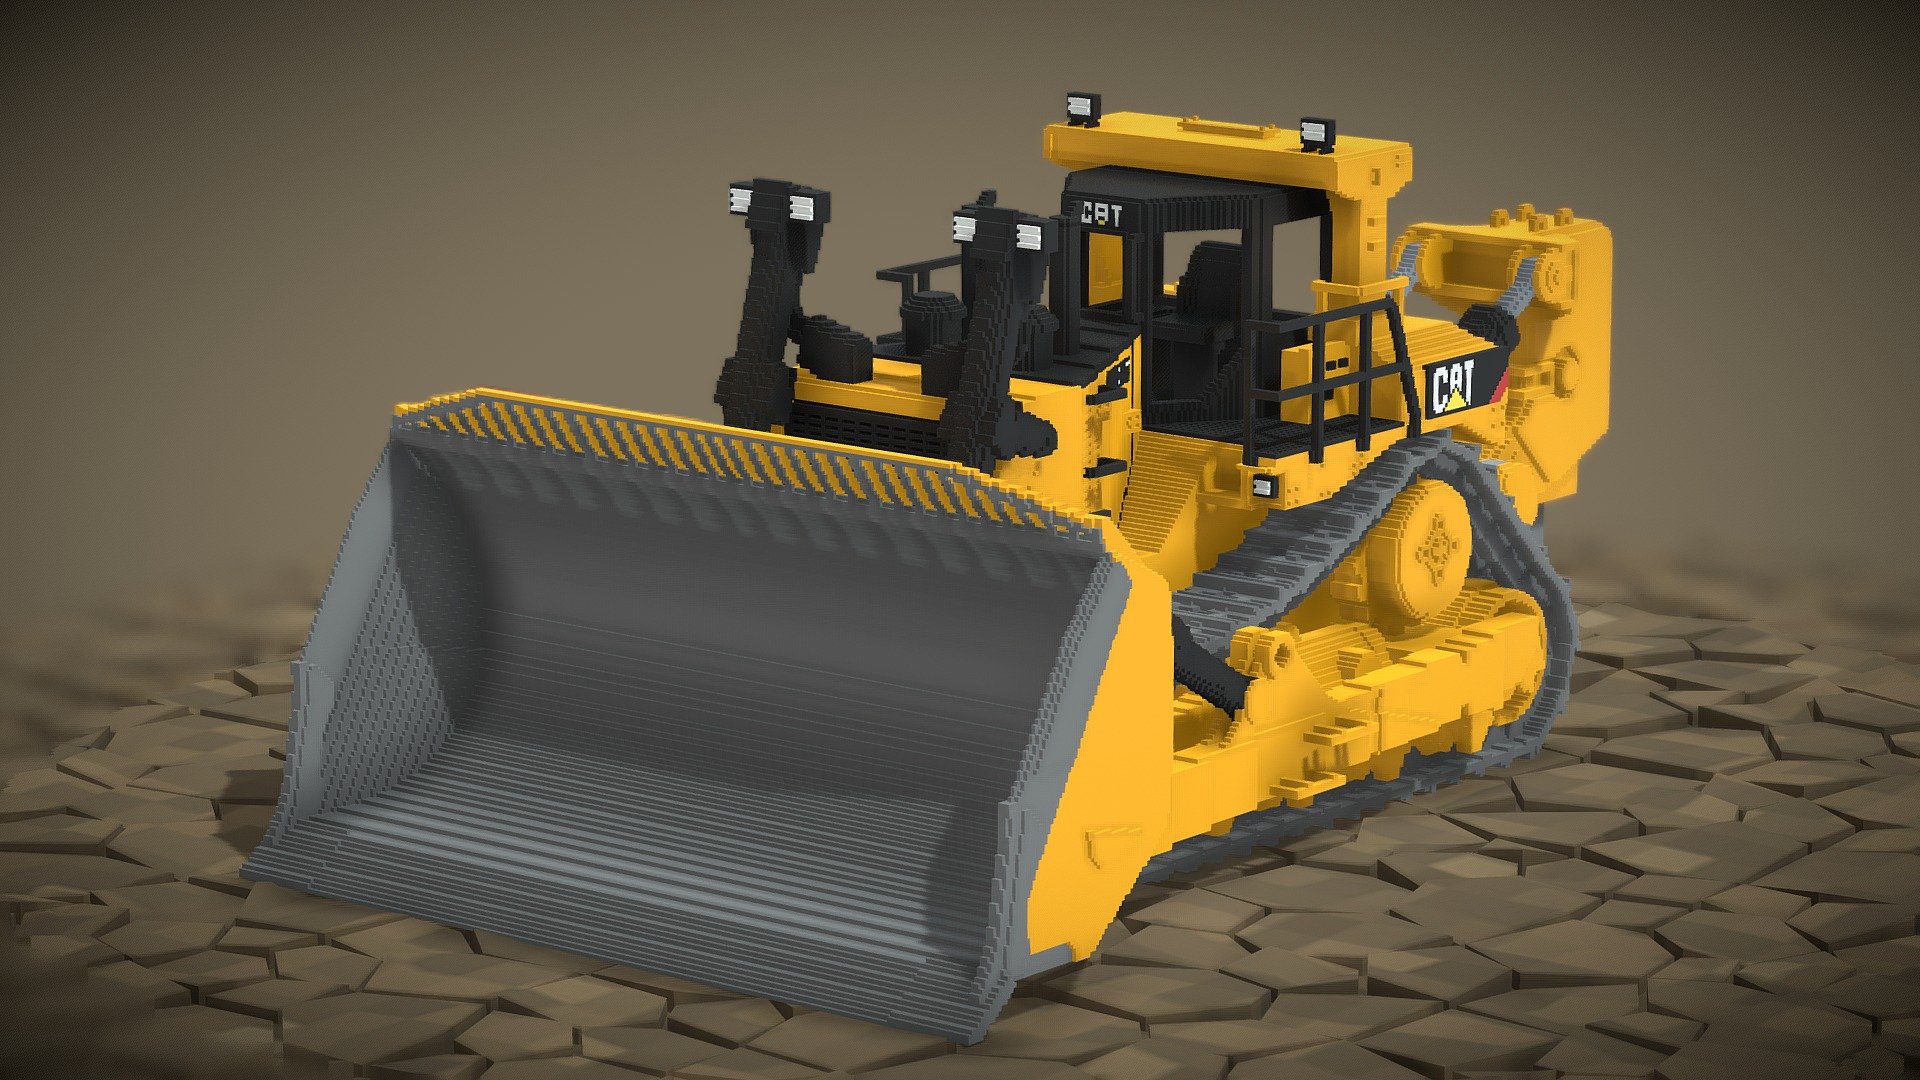 Voxel Caterpillar Bulldozer D11T high details 3D models created by Shubbak3D in MagicaVoxel Editor.



This model composed of 3 parts:

Part 1 – Body of the Bulldozer (Voxel Size = 172 x 237 x 164)

Part 2 – Blade of the Bulldozer (Voxel Size = 214 x 86 x 112)

Part 3 – Ripper of the Bulldozer (Voxel Size = 52 x 132 x 122)



All Formats Size: 71.8 MB

Zip File Size: 9.66 MB

(Polys Count: 275080) (Verts Count: 405253)

Available Formats: .vox (MagicaVoxel) .max (3ds max 2021 default) .qb .obj + mtl .fbx

Your feedback and rating are important for us 🙂 - Voxel Caterpillar Bulldozer D11T - Buy Royalty Free 3D model by SHUBBAK3D 3d model